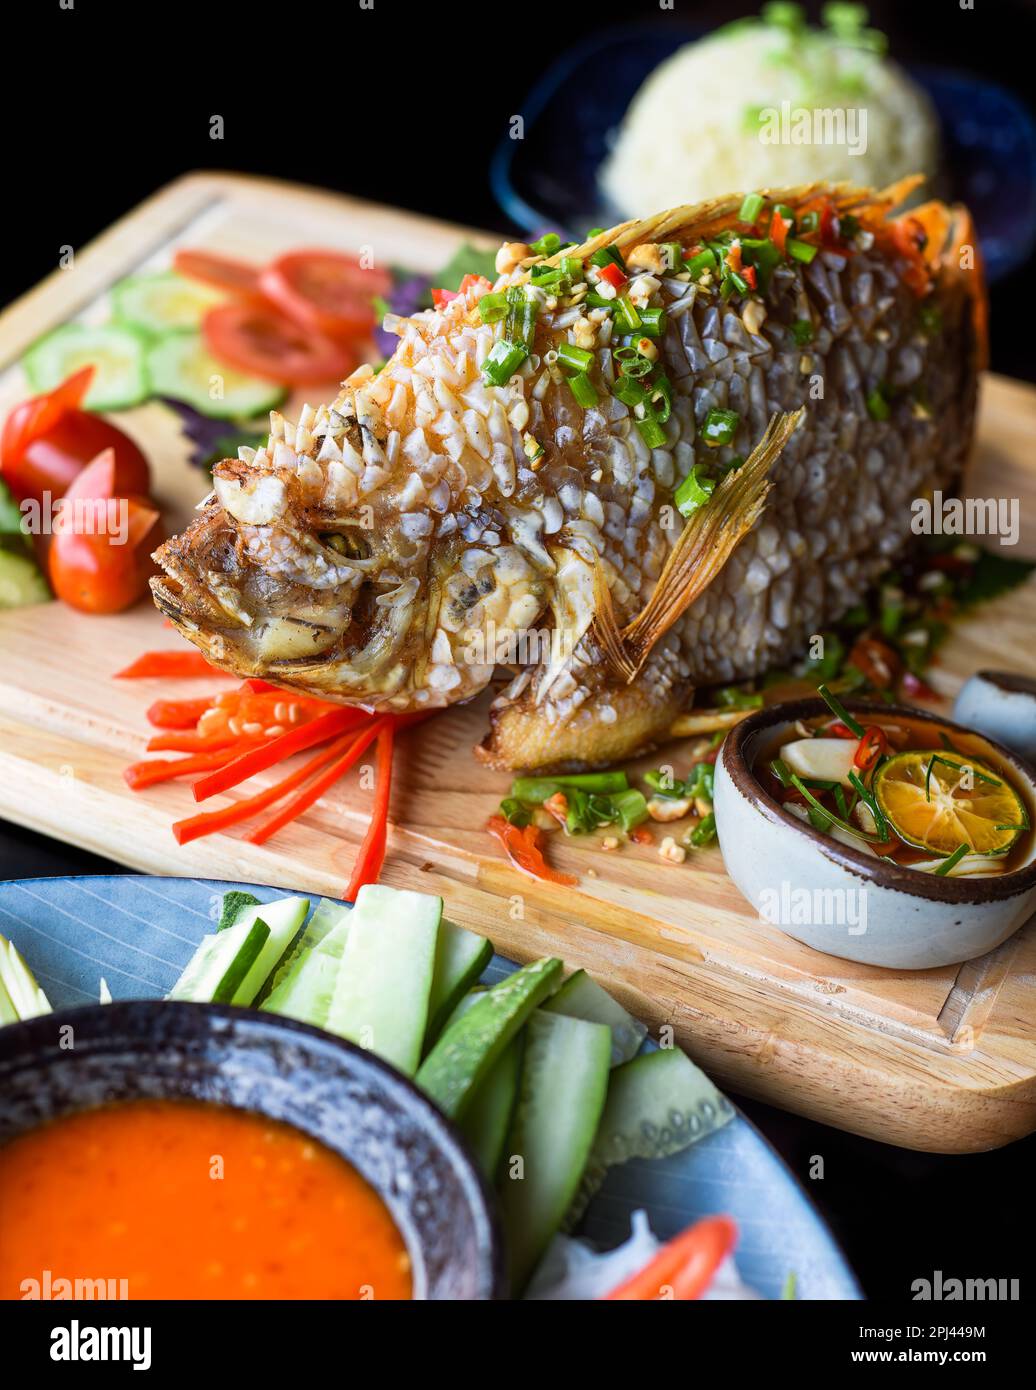 Red perch grilled in batter with vegetables and greens on wooden chop board isolated on black background side view Stock Photo